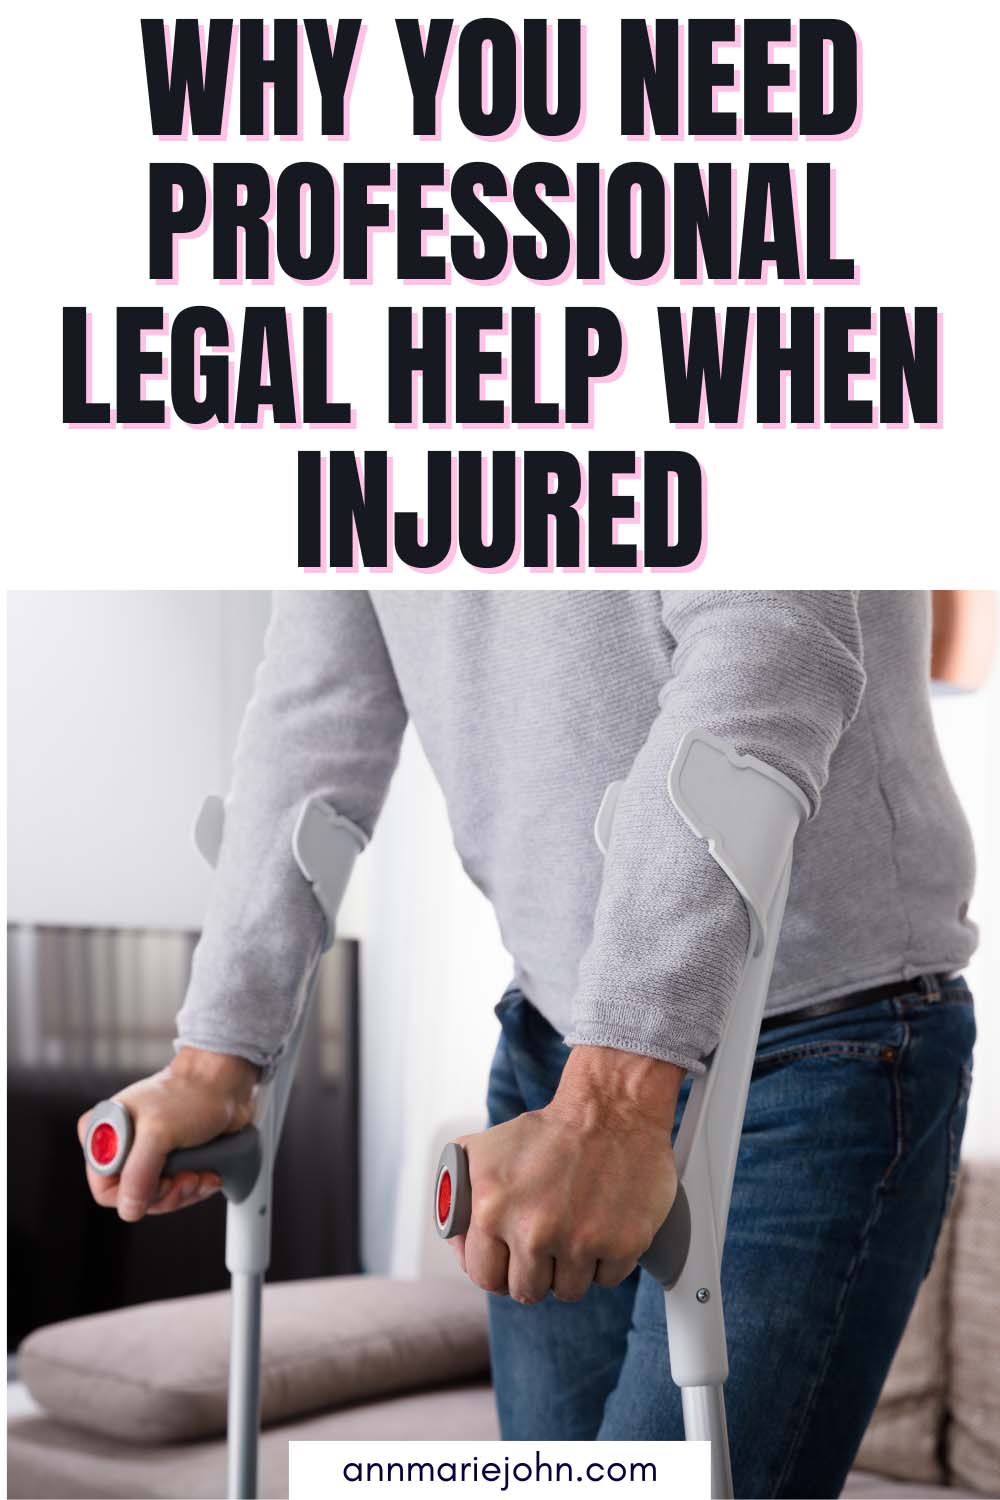 WHY YOU NEED PROFESSIONAL LEGAL HELP WHEN INJURED